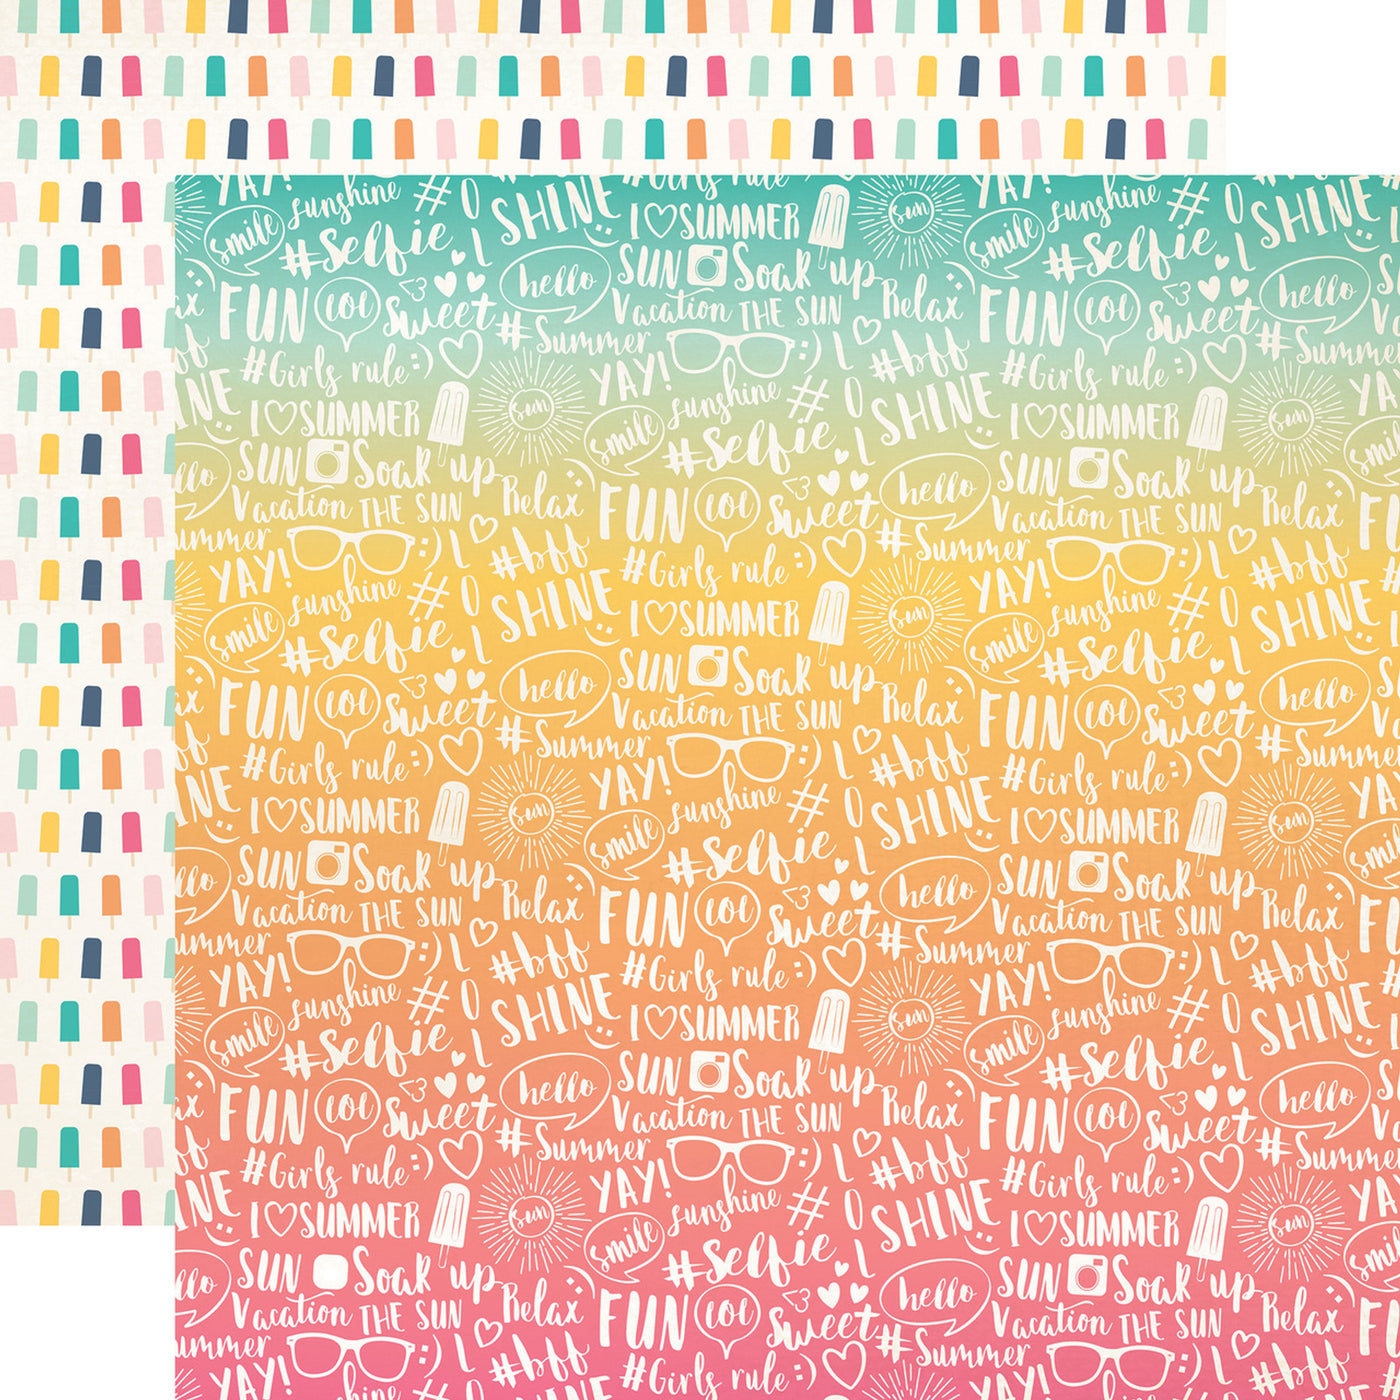 12x12 double-sided sheet. (Side A - fun, colorful ombre background with summer phrases in white. Side B - rows of colorful little popsicles on an off-white background) Archival quality, acid-free. 